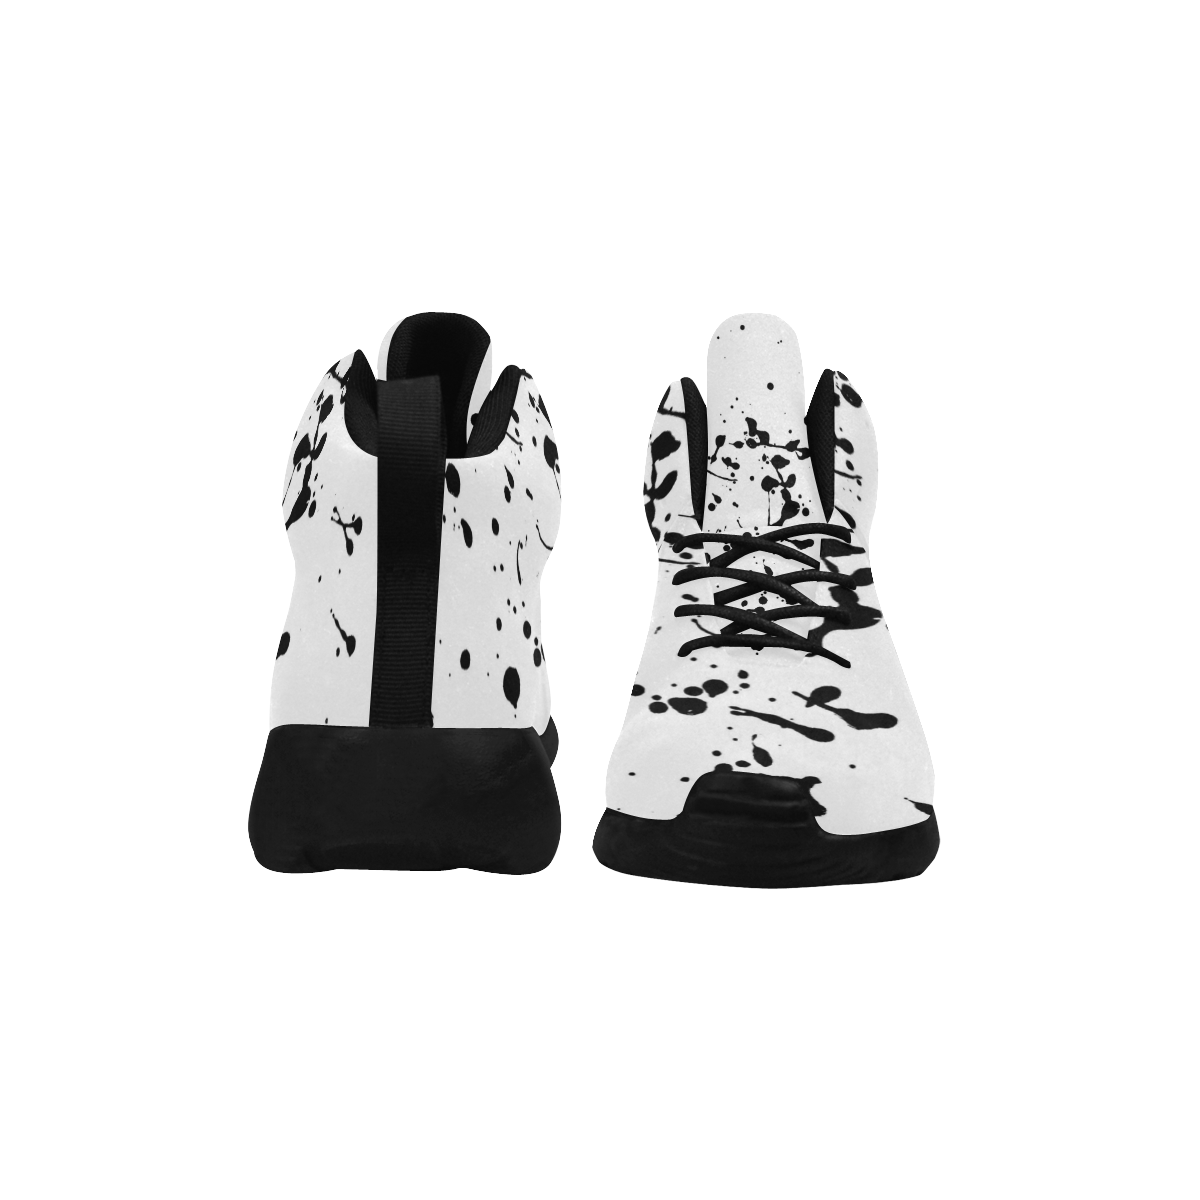 Black On White Abstract Dots And Smudges Women's Chukka Training Shoes (Model 57502)